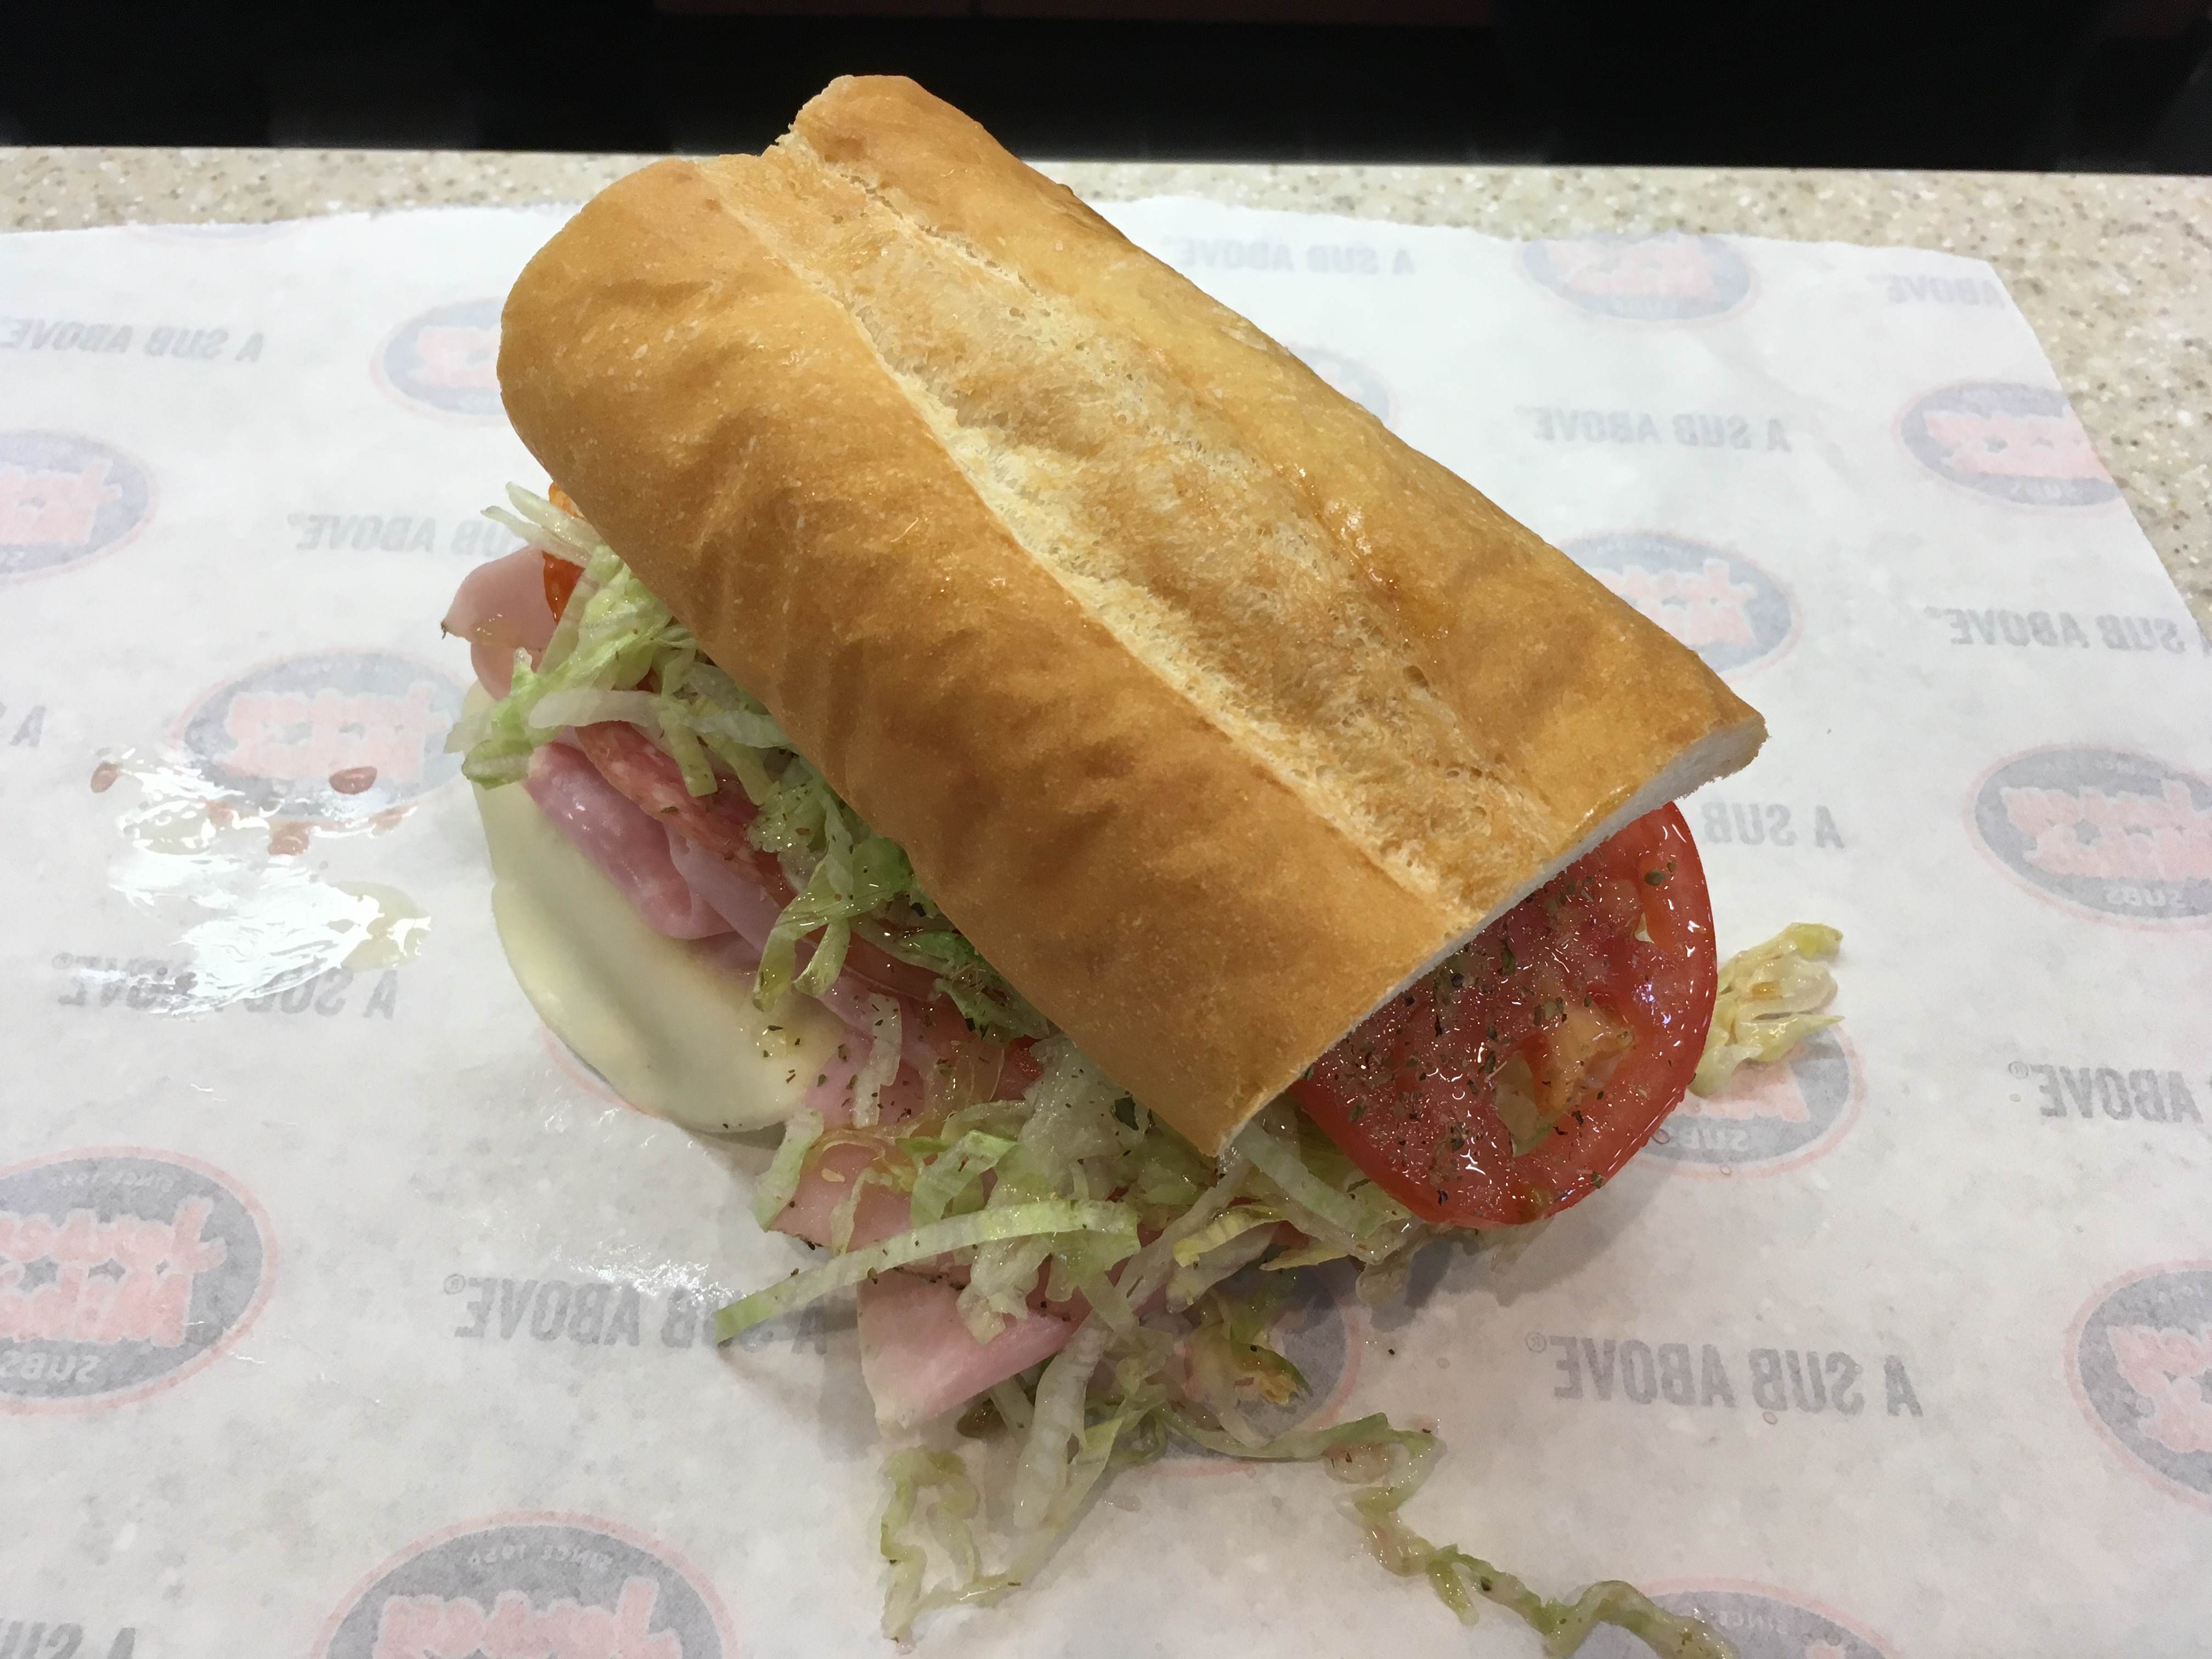 jersey mike's birthday sub